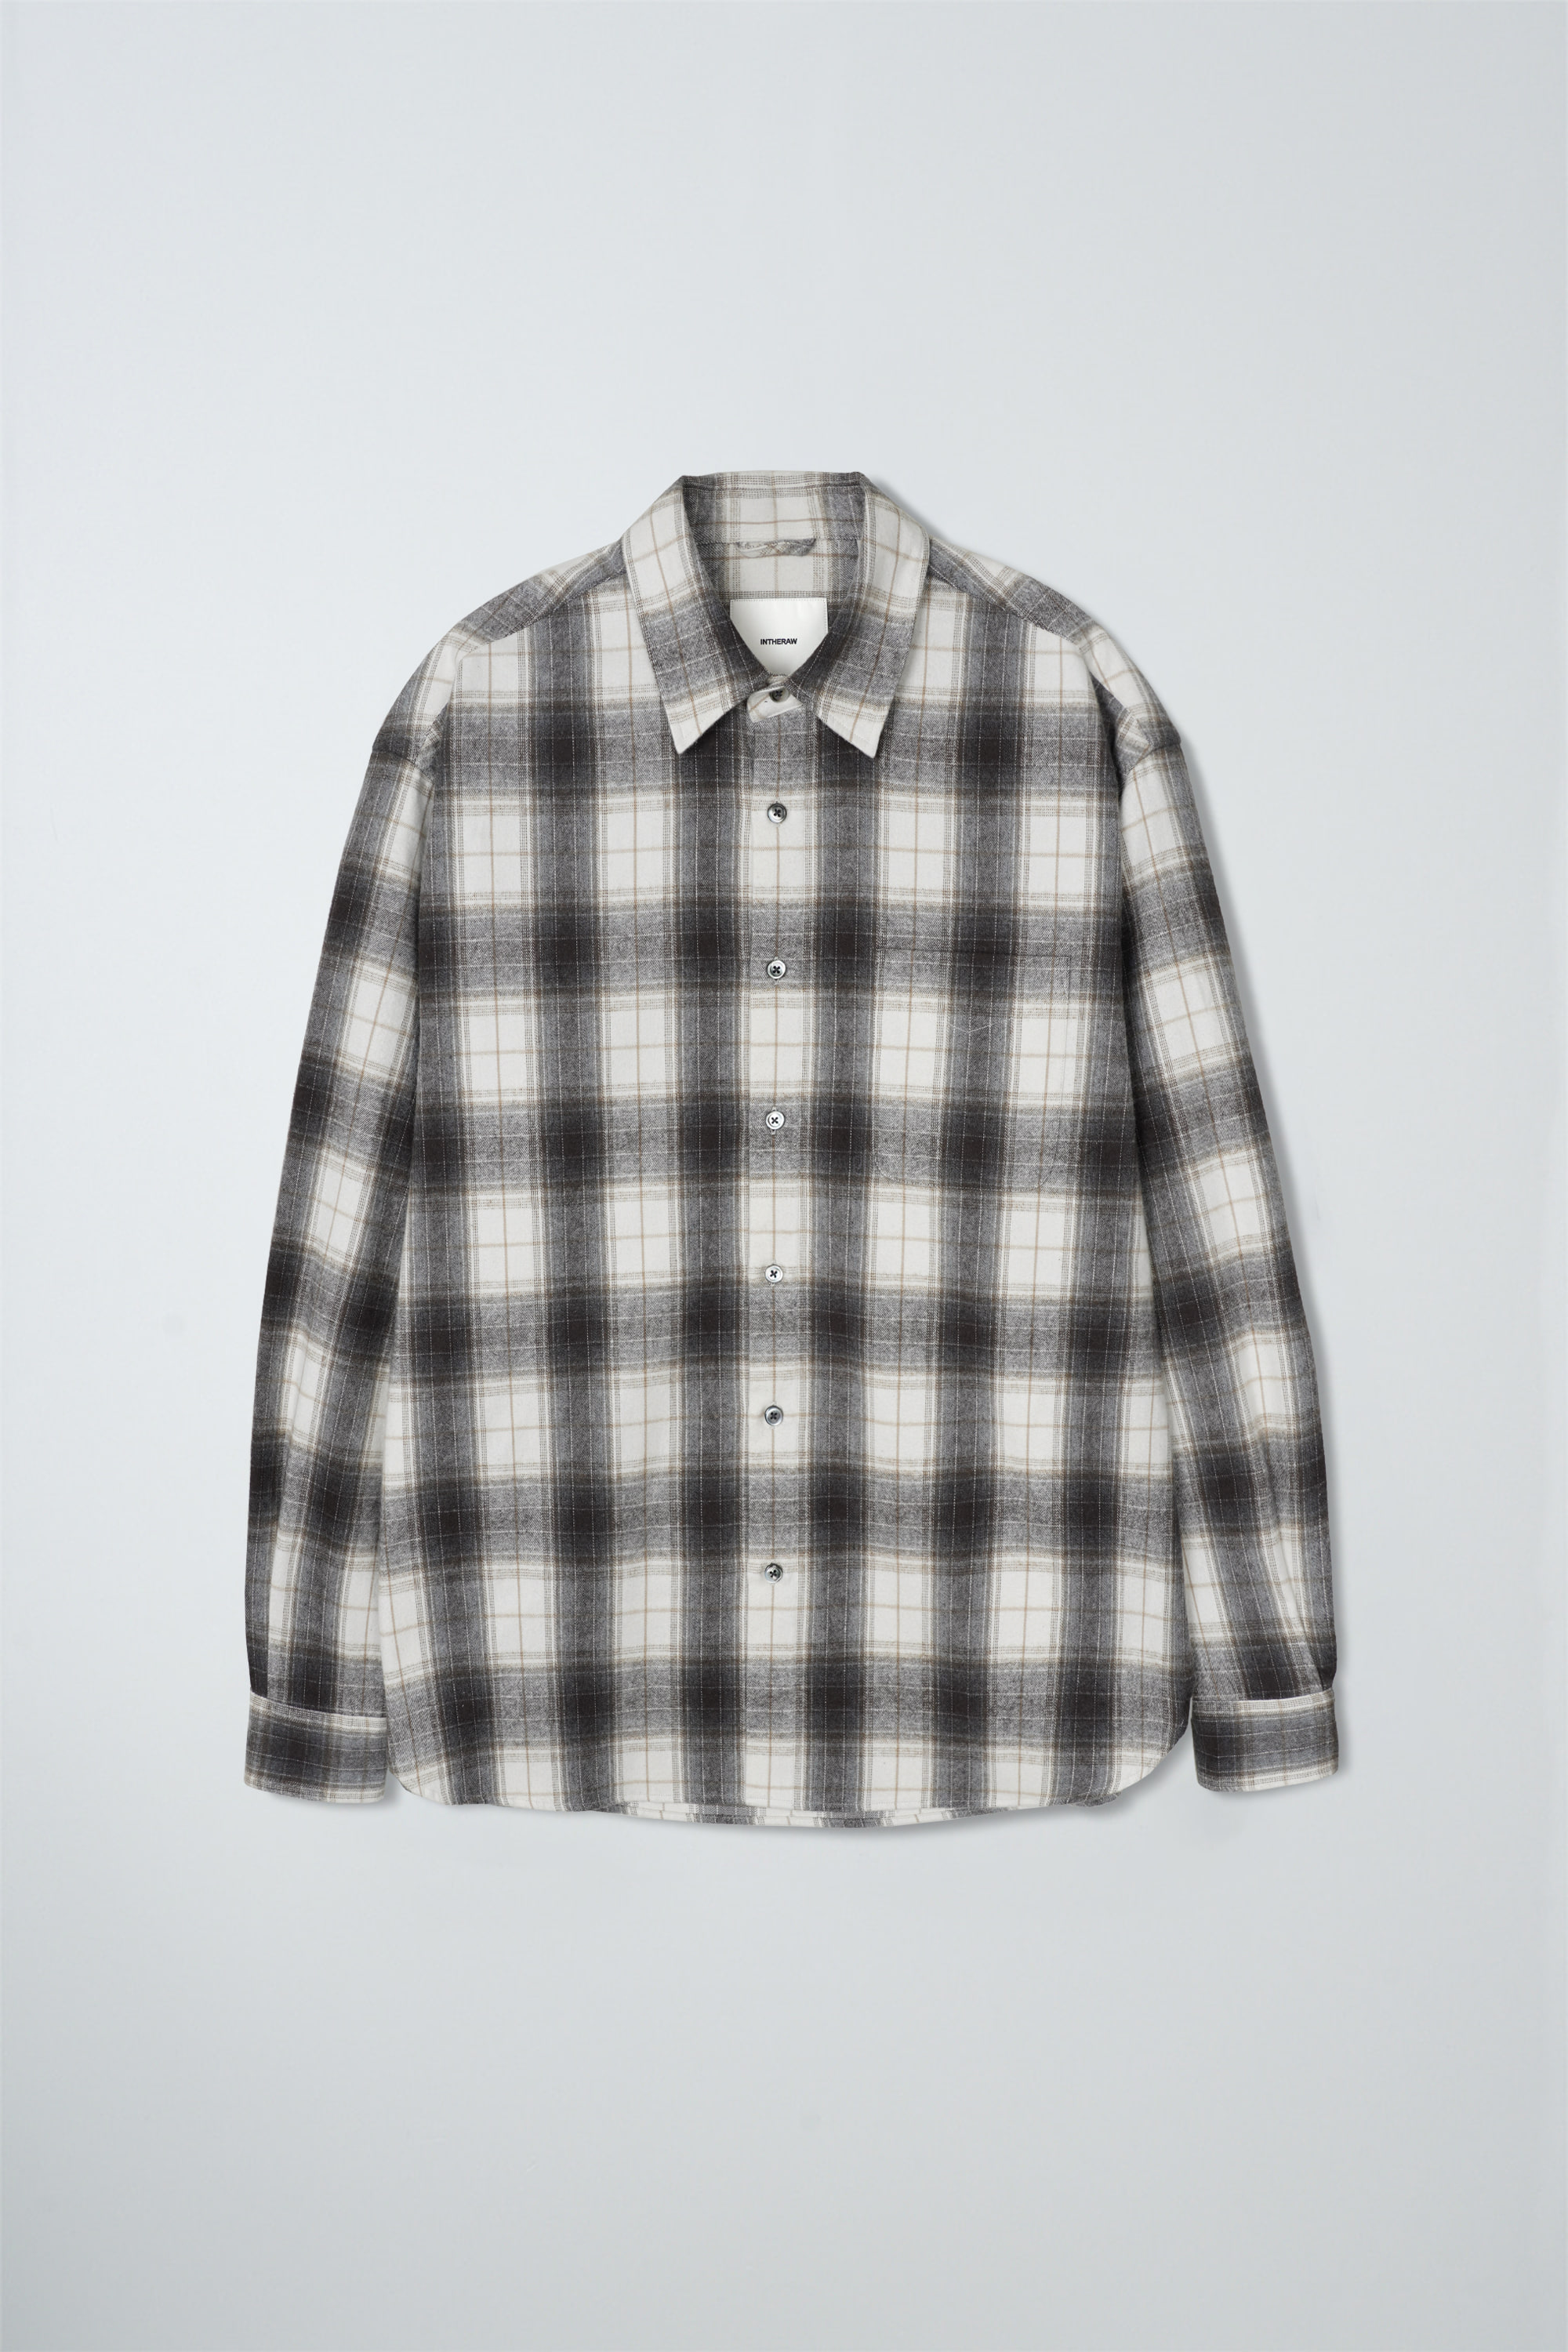 SHAGGY FLANNEL CHECKED SHIRT - BROWN